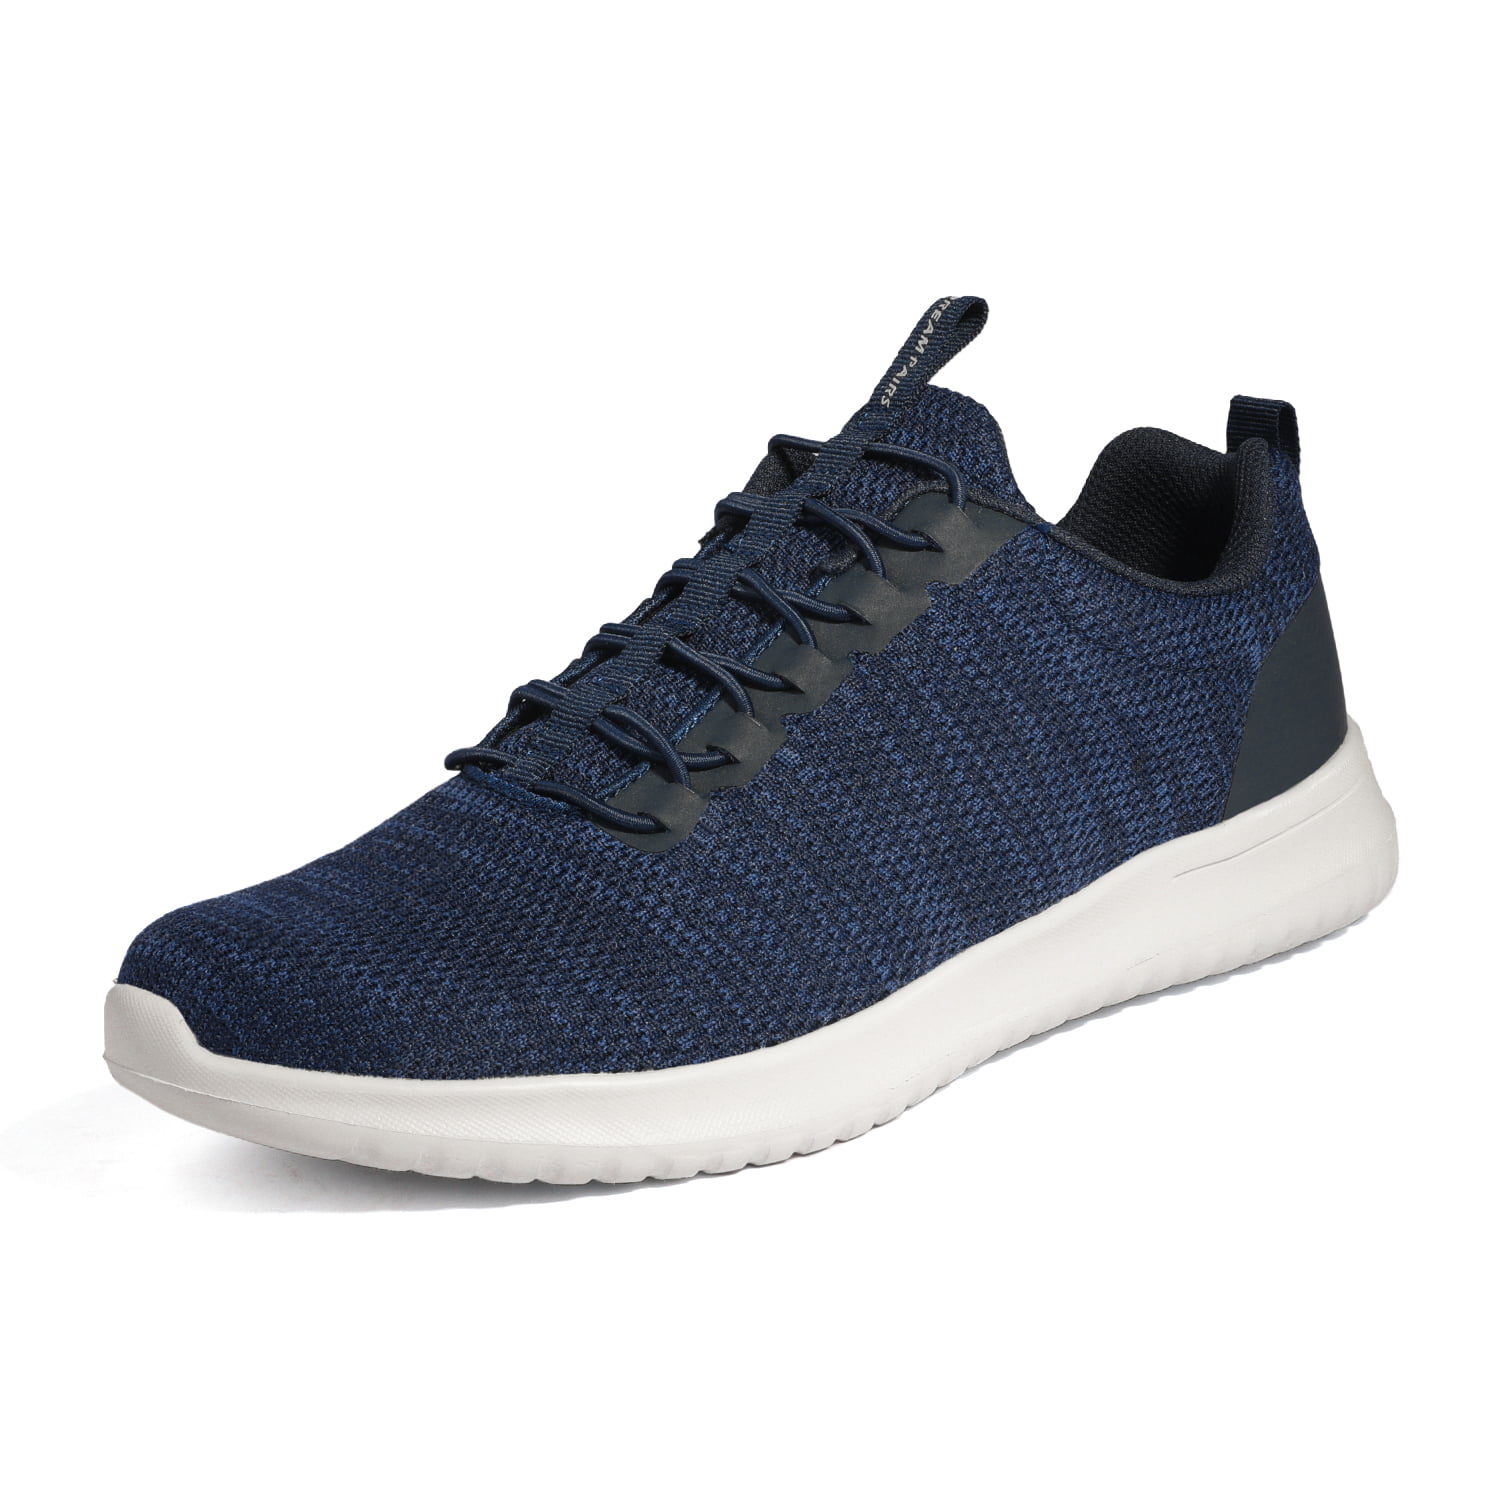 DREAM PAIRS Mesh Sneakers Sports Casual 